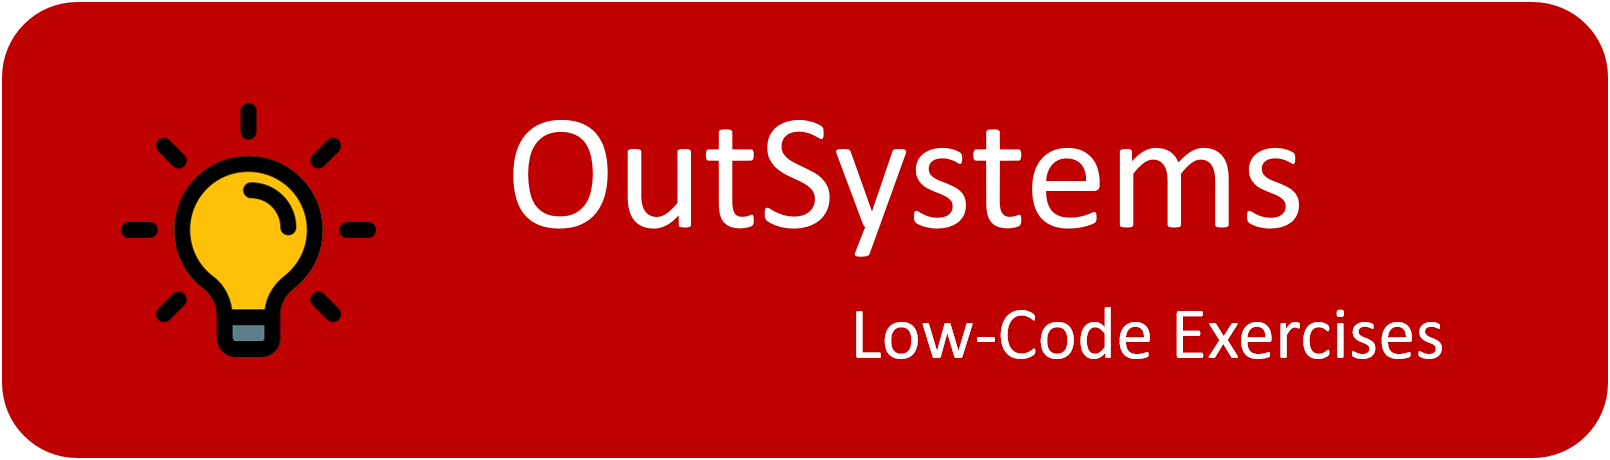 OutSystems Image